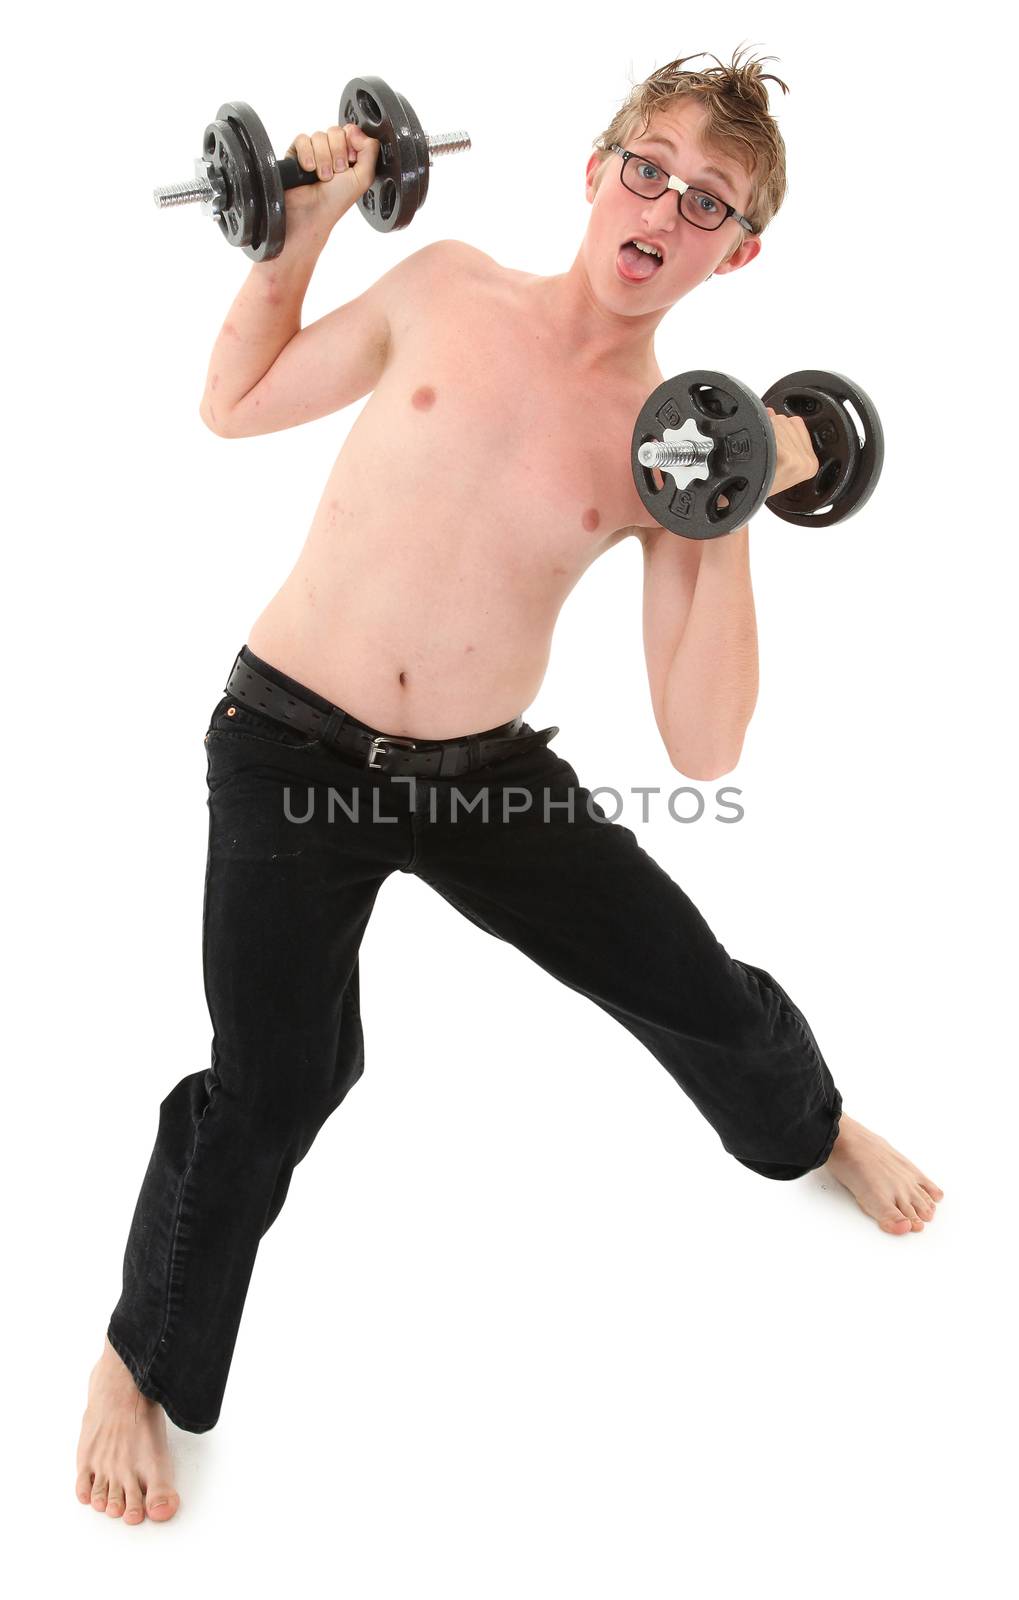 Humorous weightlifting workout images with adorable teen boy. Cl by duplass